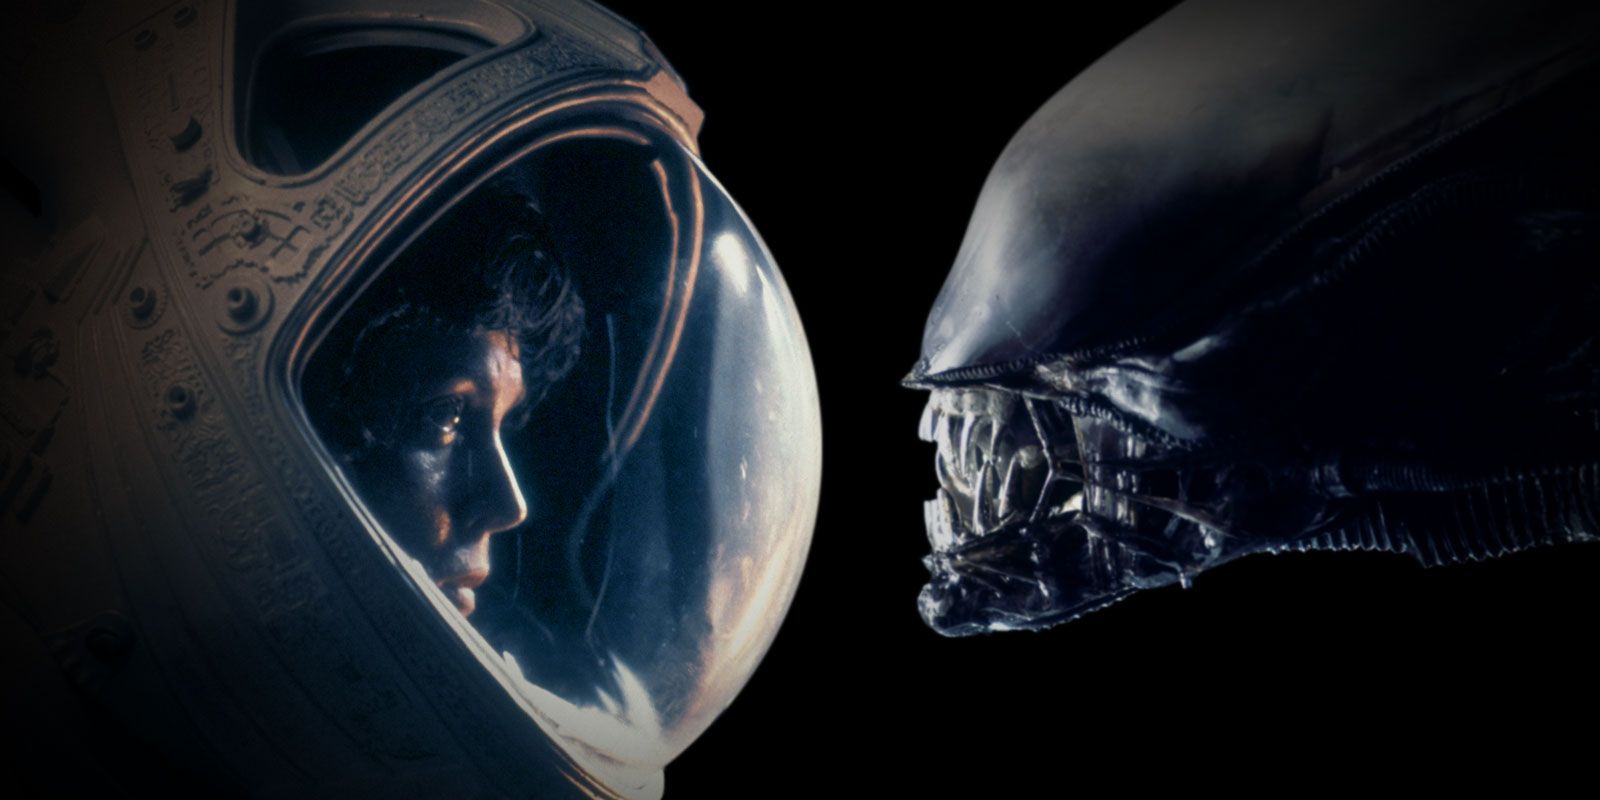 From the original Alien movie, Ripley wearing a space helmet and the xenomorph.